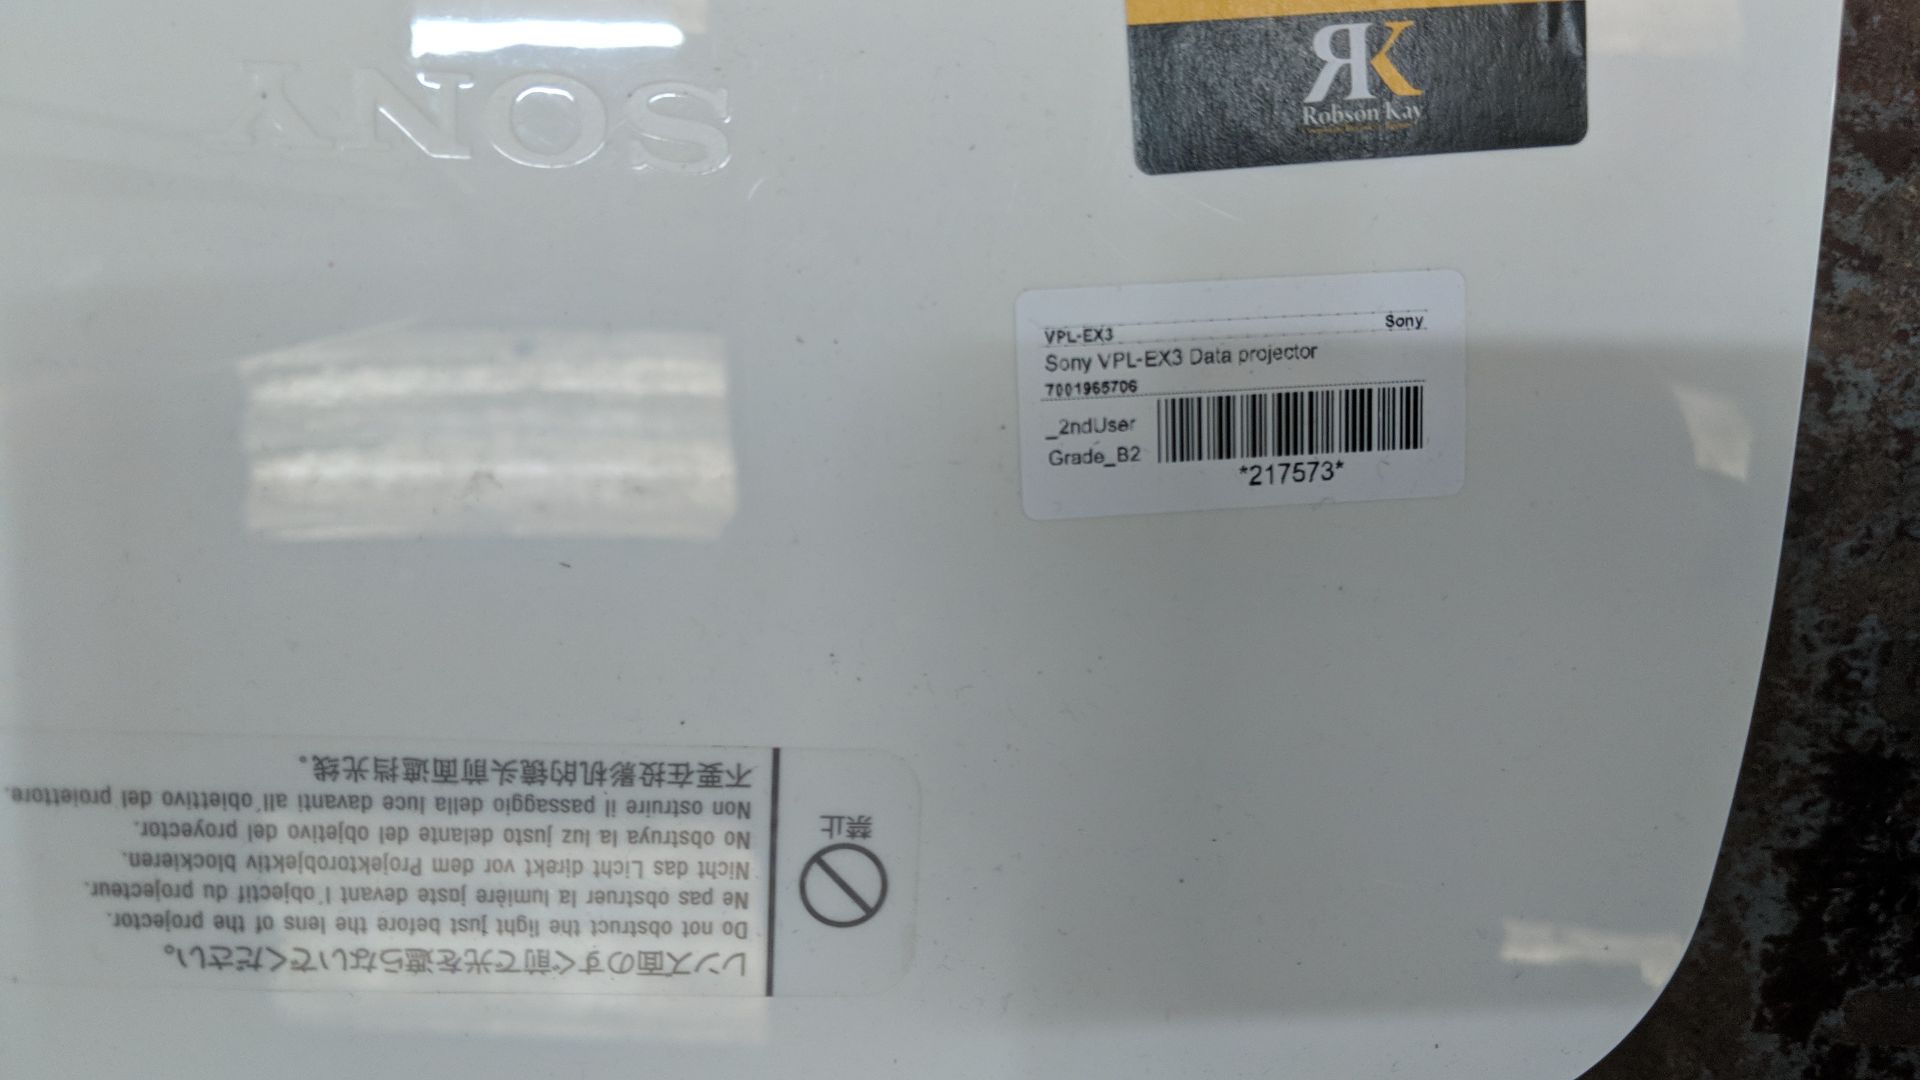 Sony model VPL-EX3 data projector IMPORTANT: Please remember goods successfully bid upon must be - Image 4 of 5